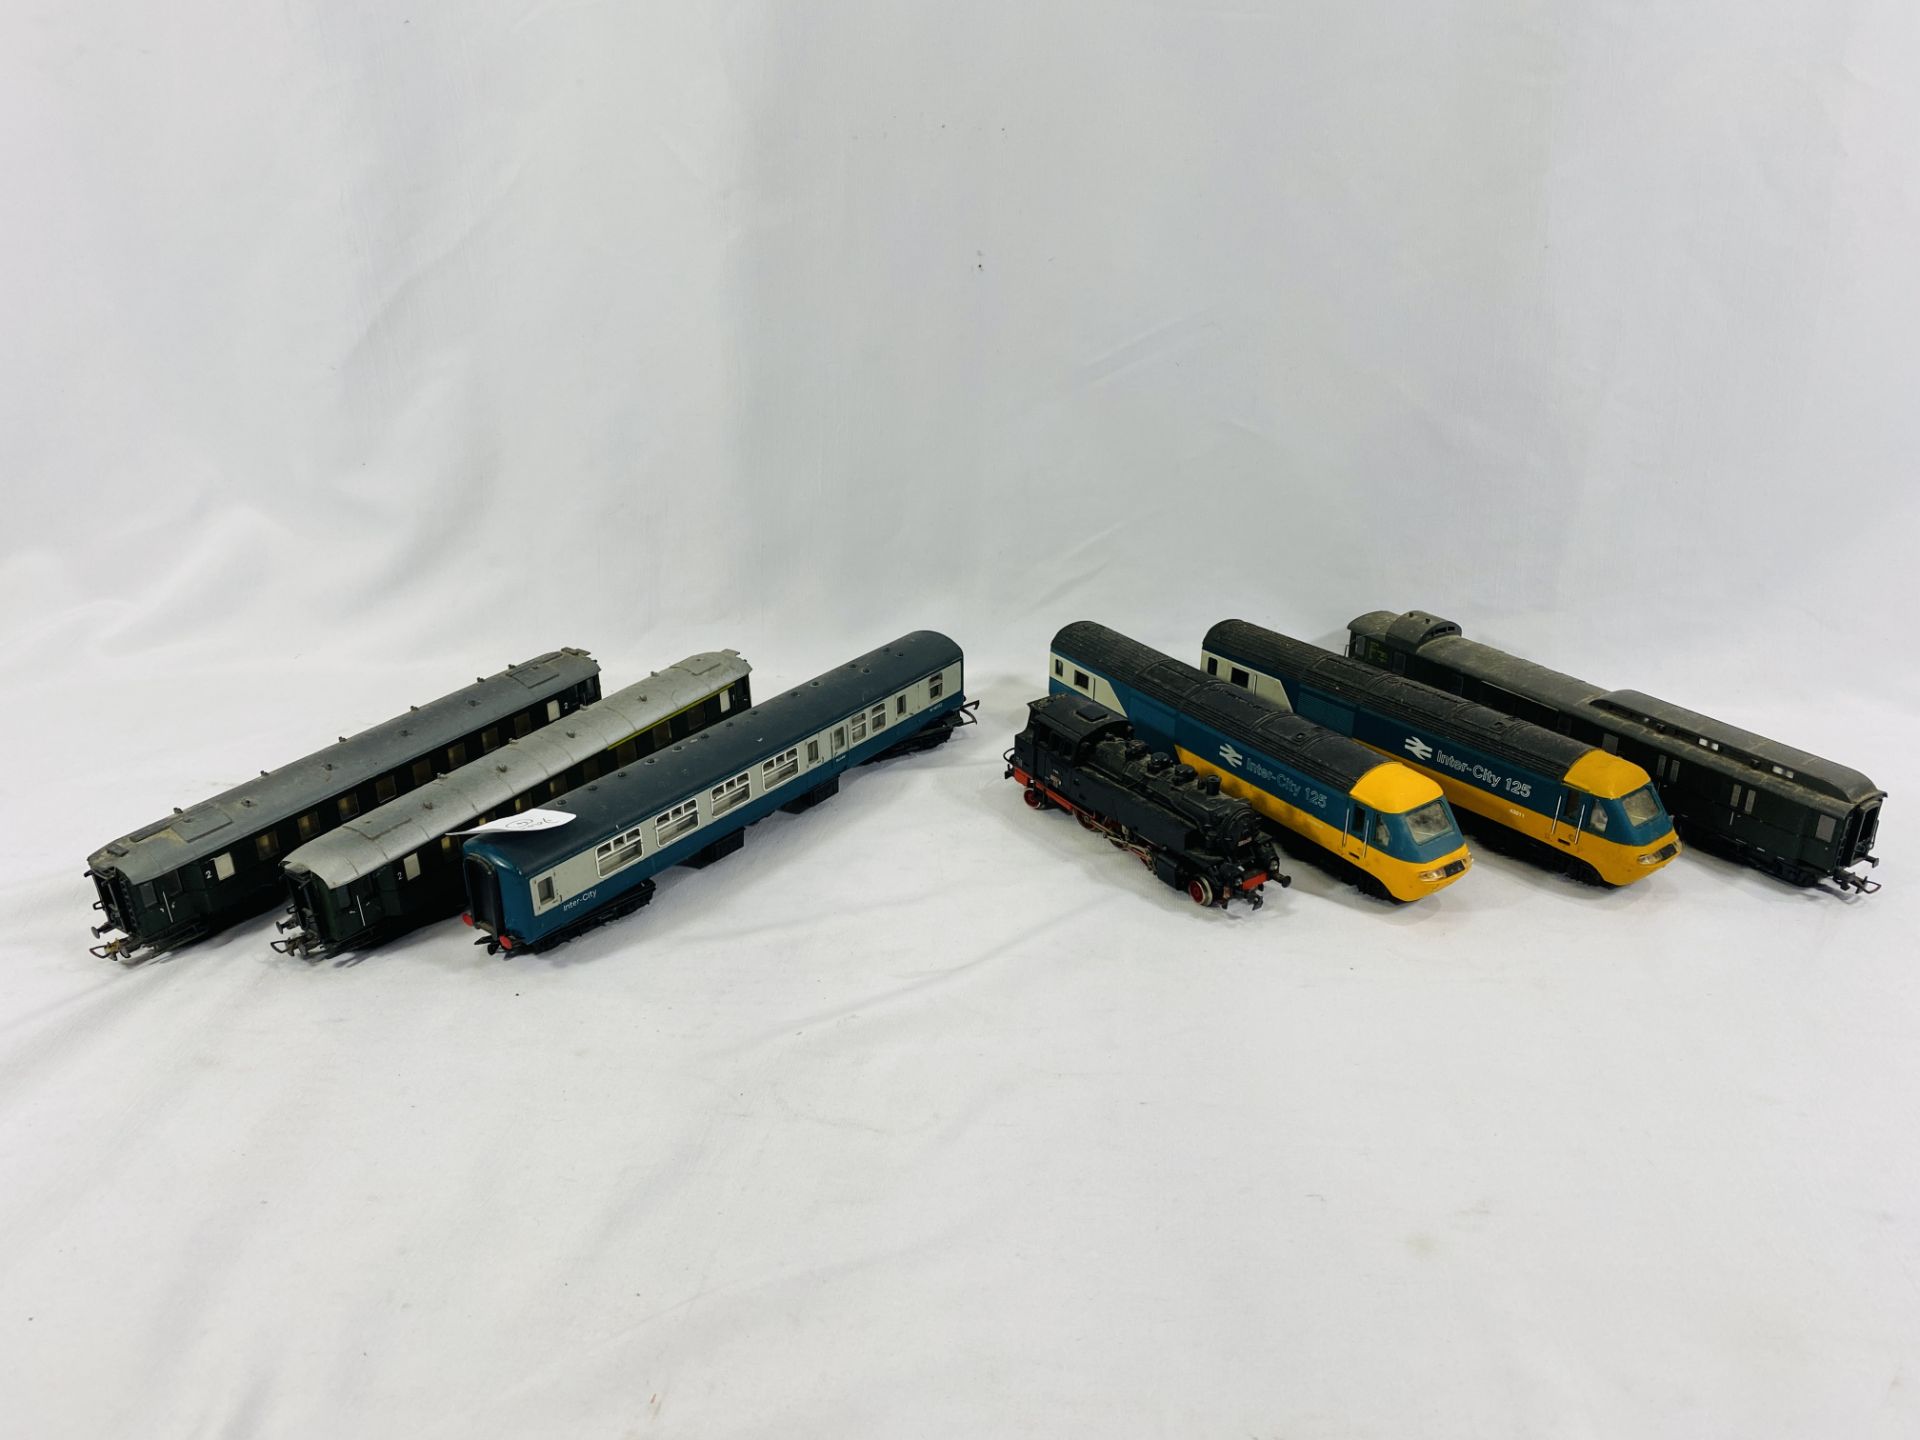 Thee 00 gauge locomotives and four 00 gauge carriages